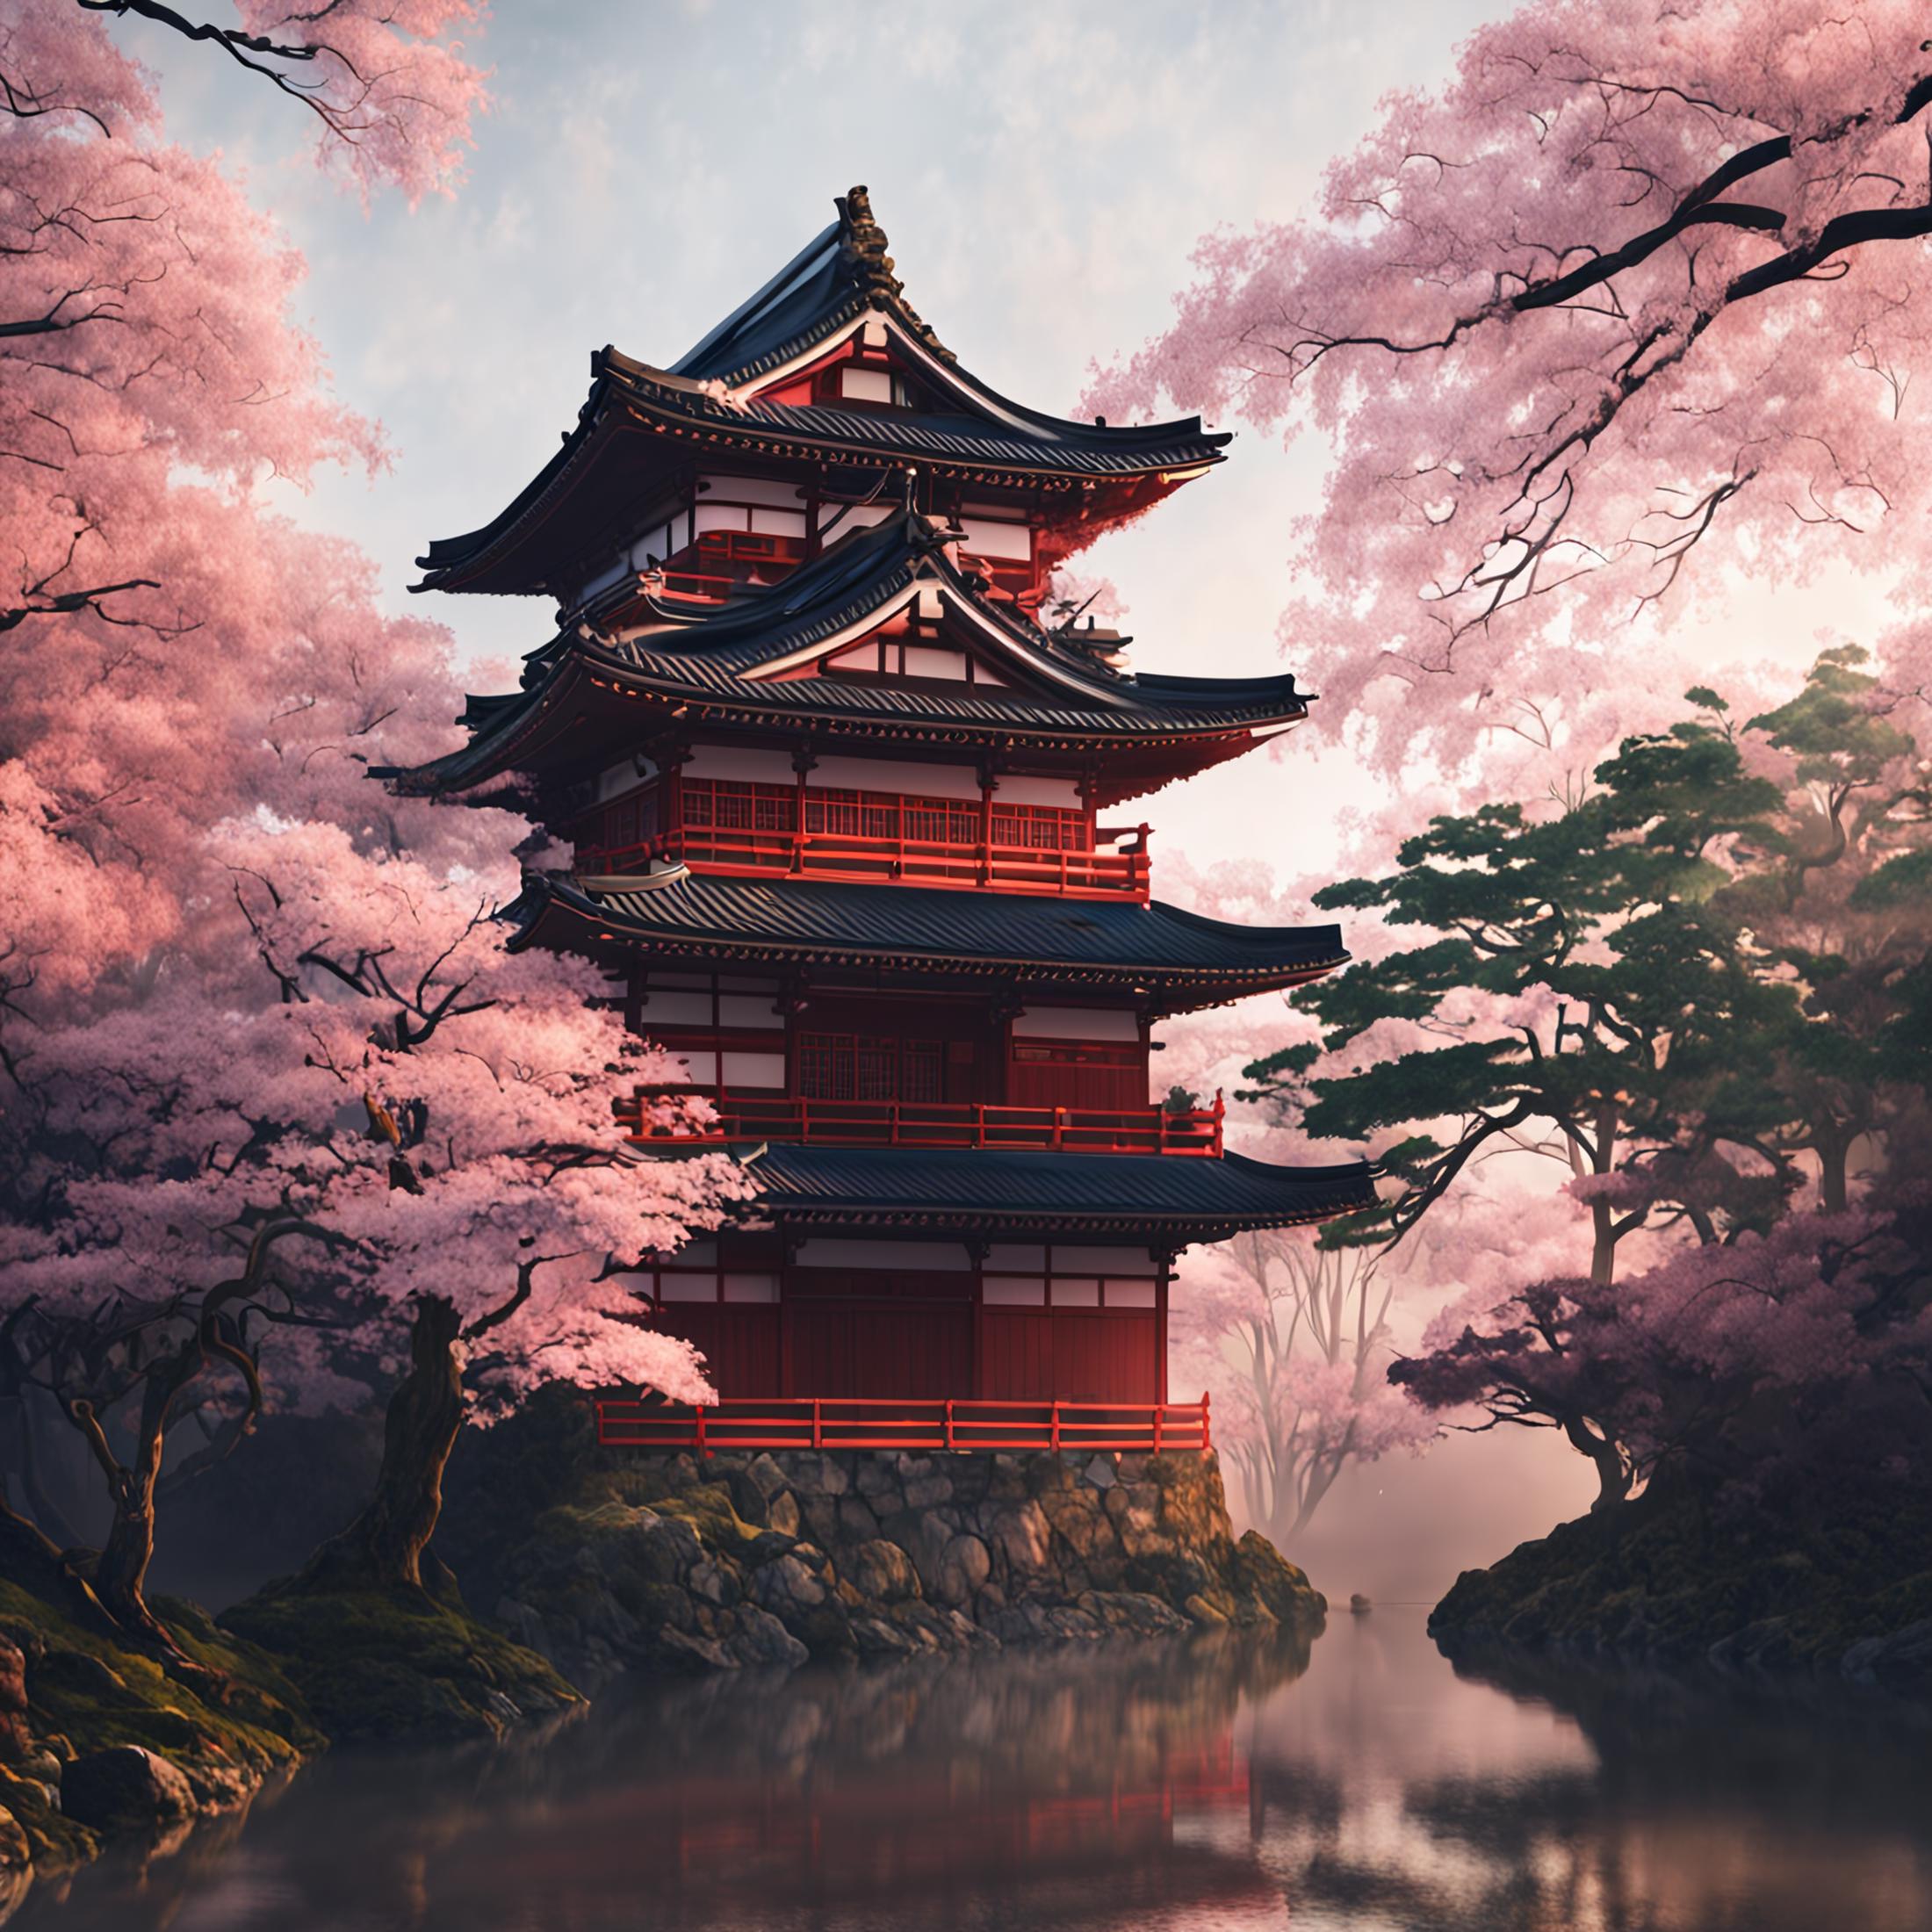 Japanese_Art image by Standspurfahrer